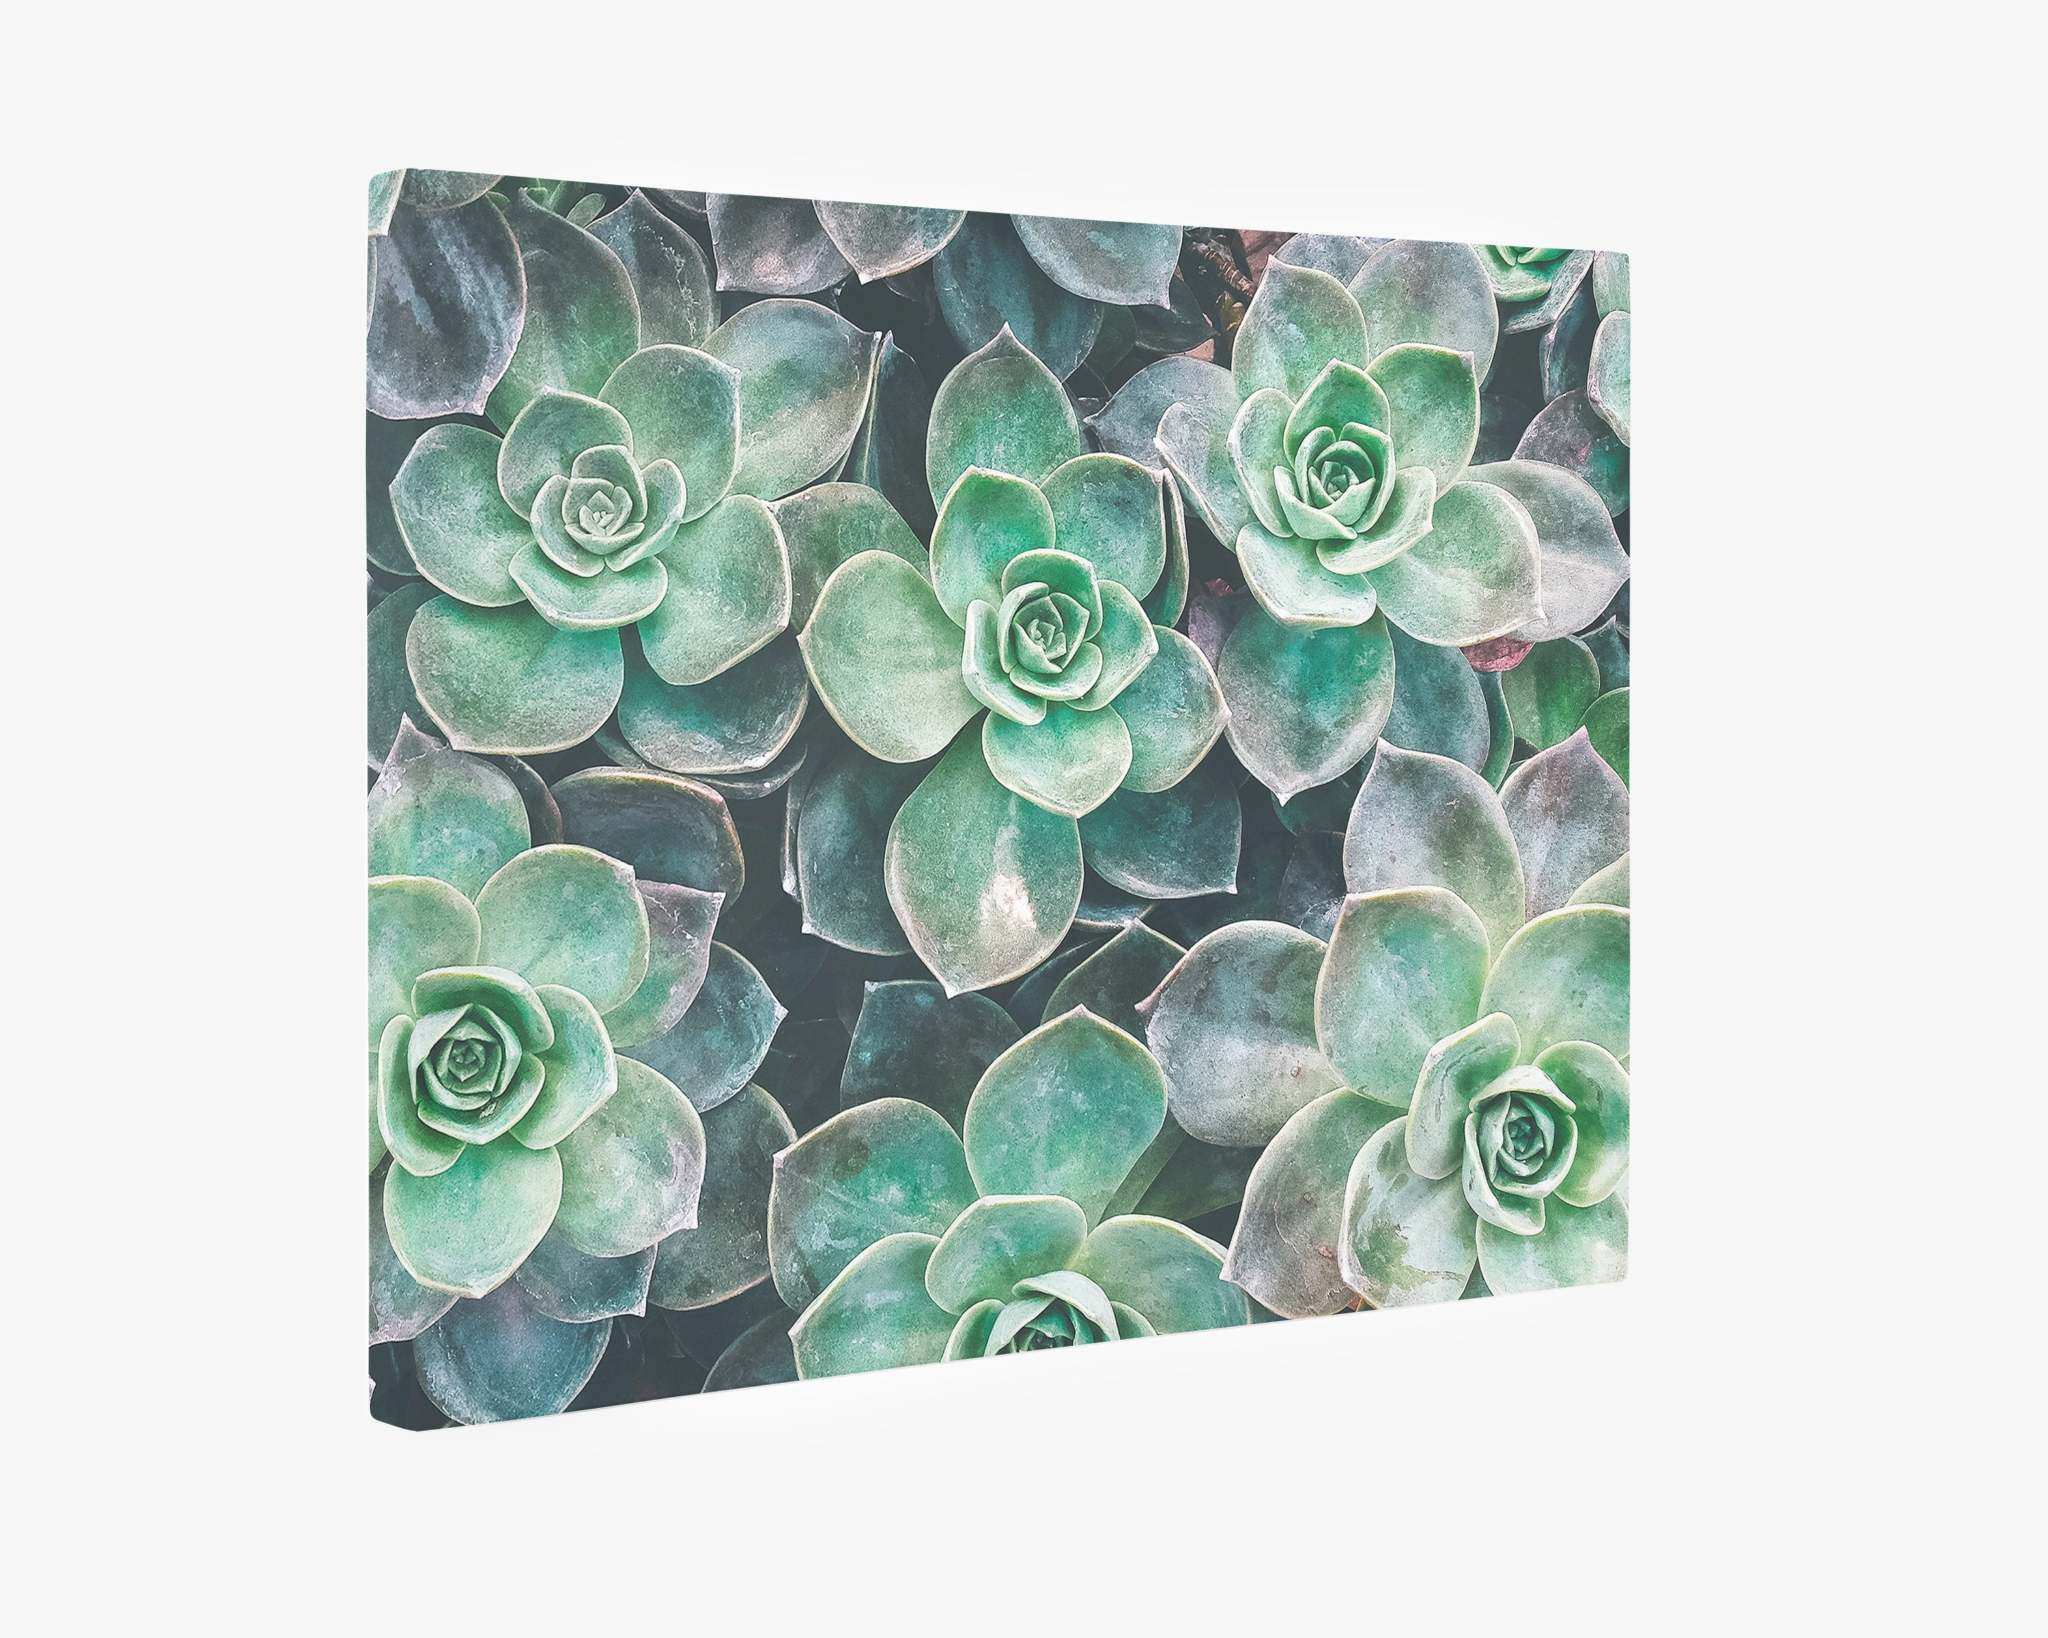 The Offley Green Fresh Green Succulent Canvas Wall Art, &#39;Bed of Succulents,&#39; features a close-up of multiple green succulent plants. The succulents have rosette-shaped leaves with a slight pinkish hue on the edges, creating a calming and visually appealing pattern against a white background. This botanical print adds natural elegance to any space.